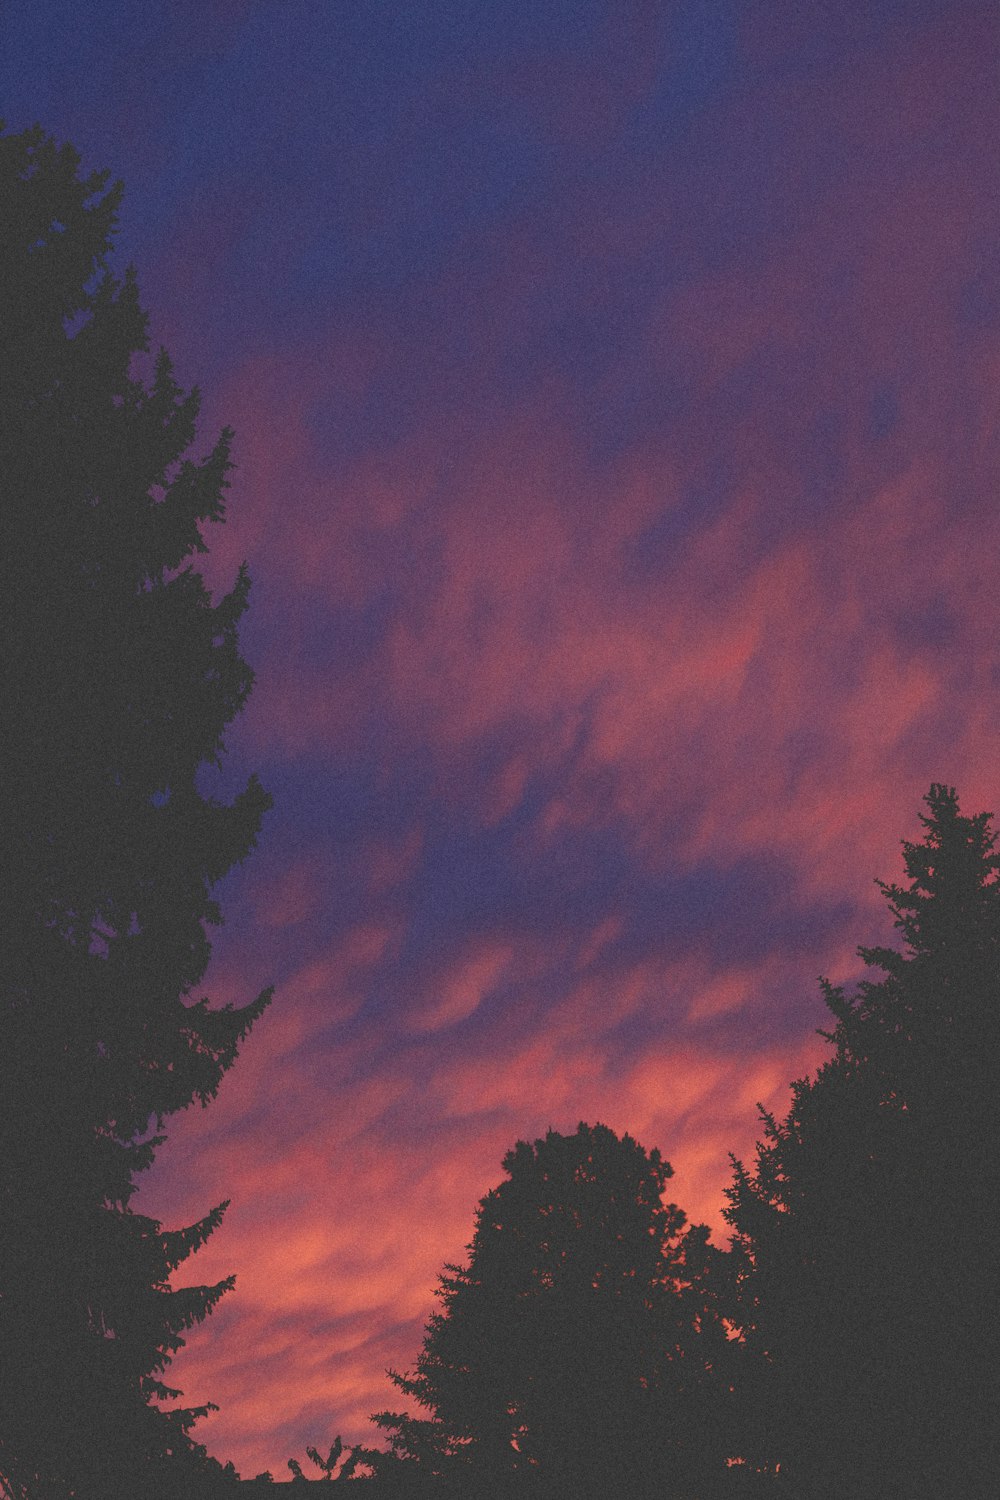 silhouette of trees under orange and blue sky